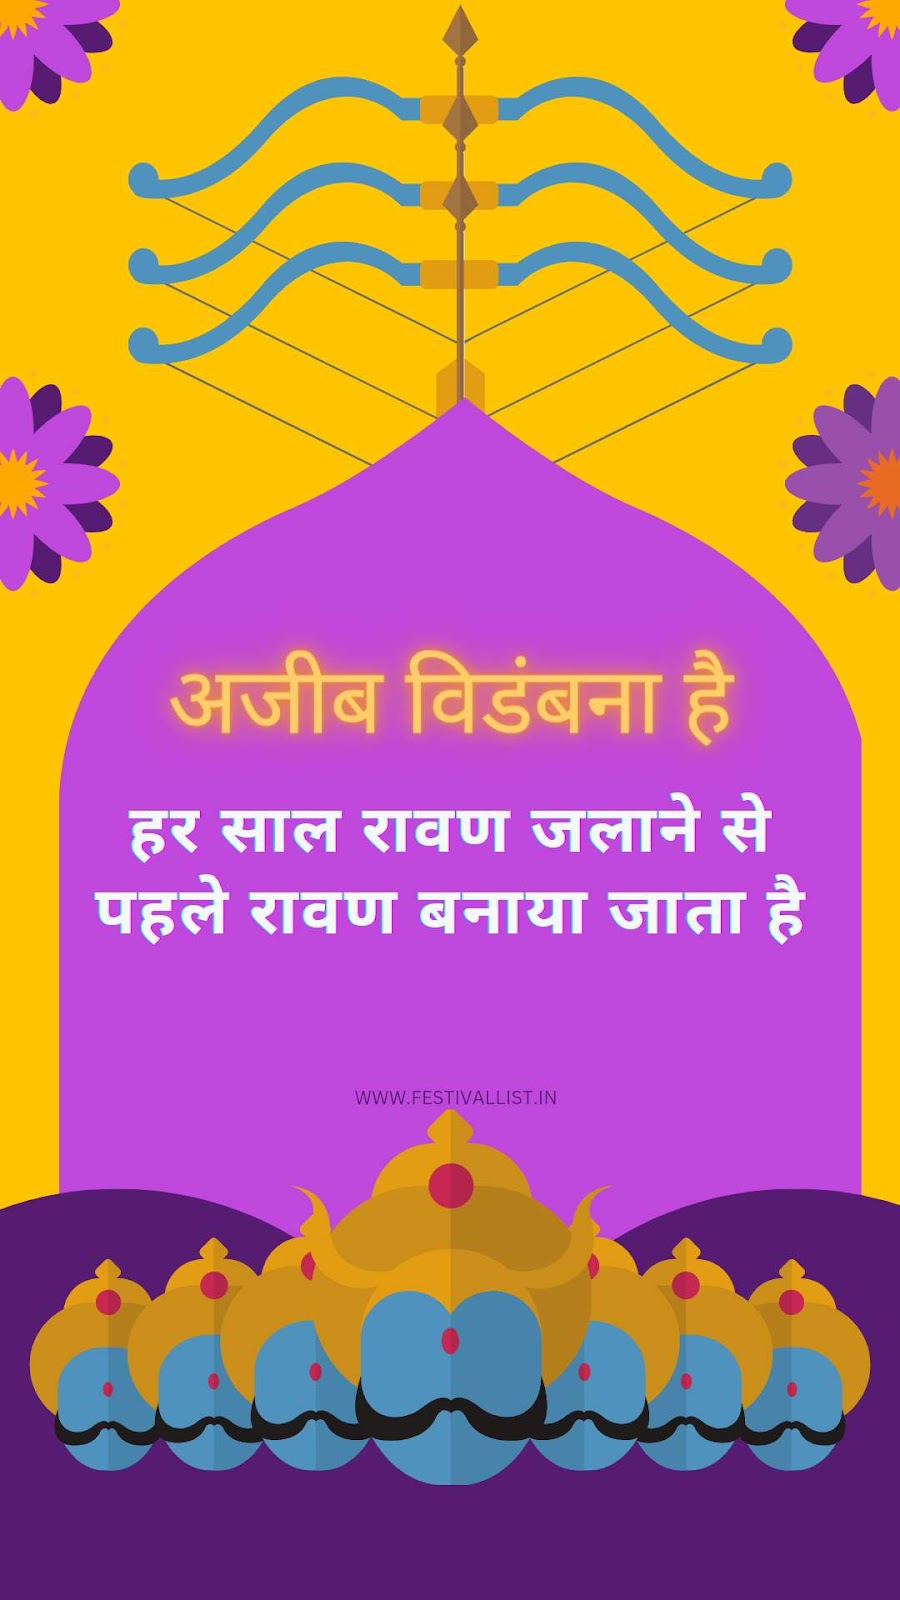 Best WhatsApp Quotes on Dussehra in Hindi